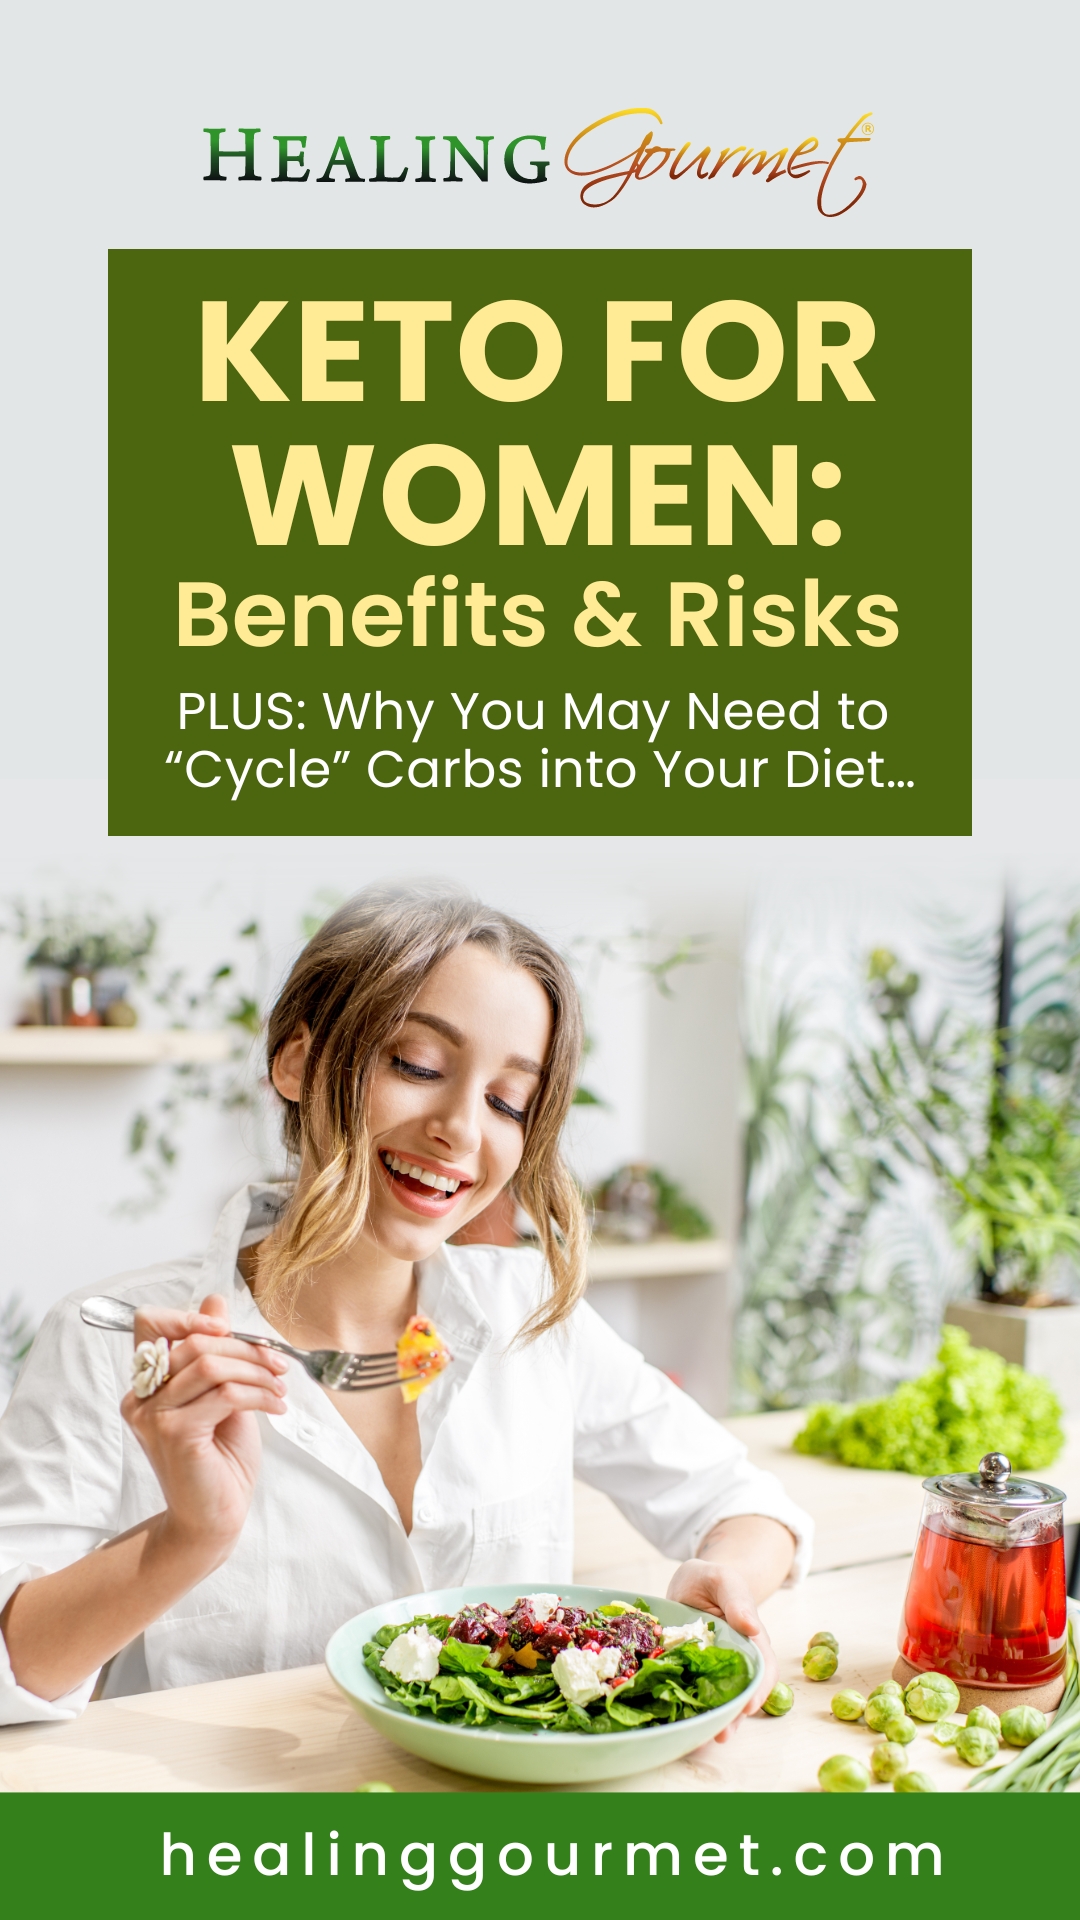 Ketosis for Women: The Benefits, Risks and Importance of Cycling